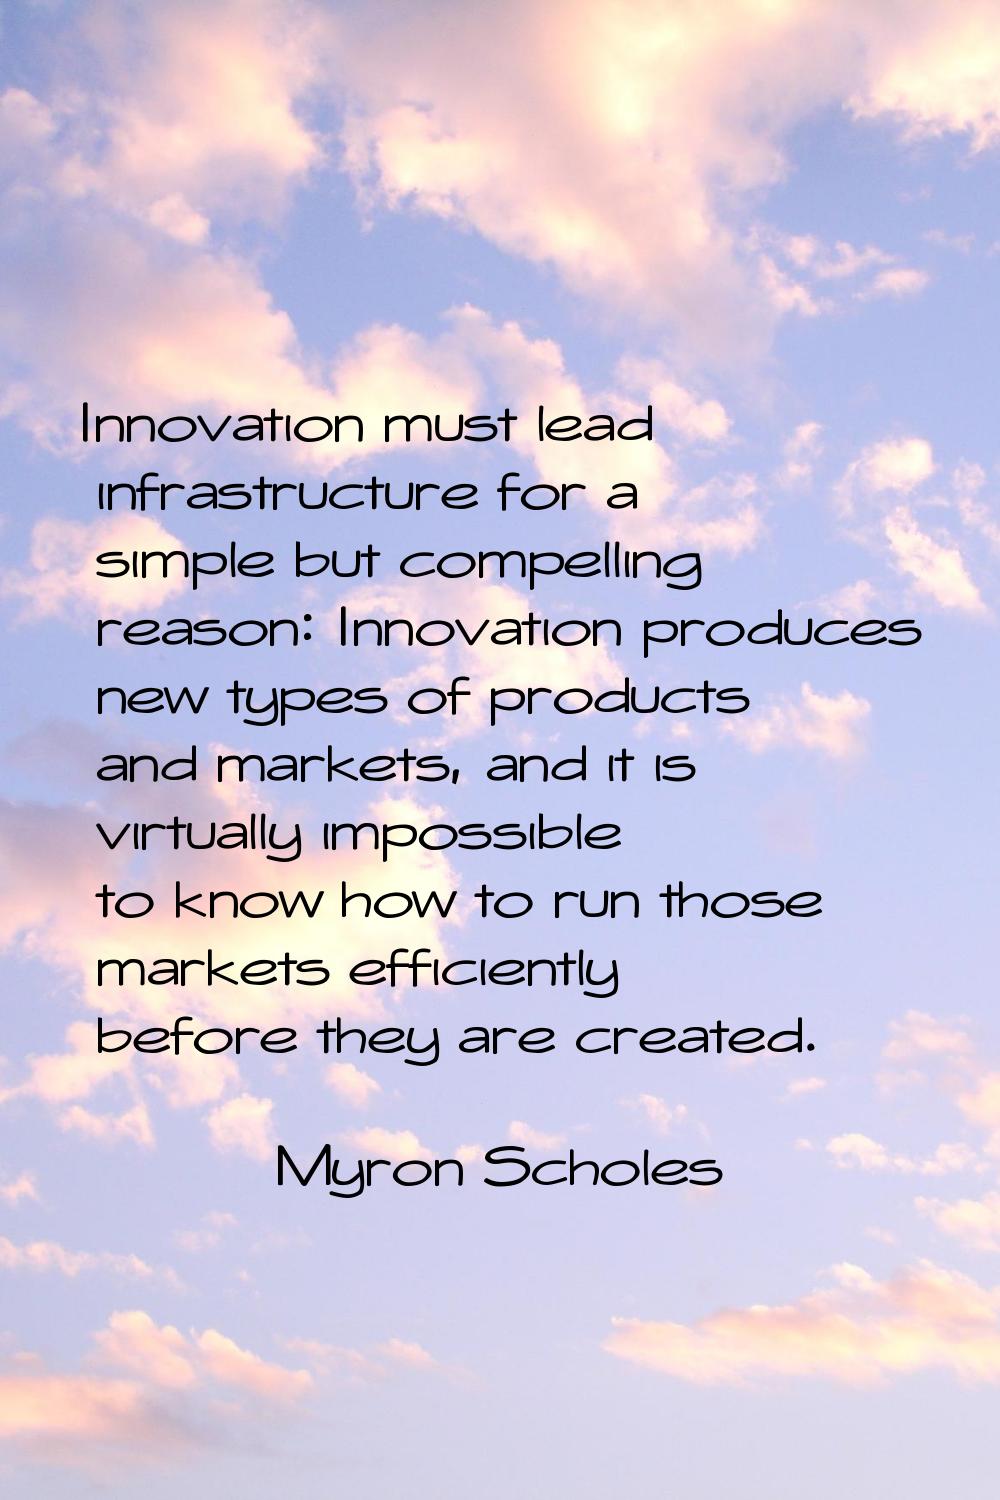 Innovation must lead infrastructure for a simple but compelling reason: Innovation produces new typ